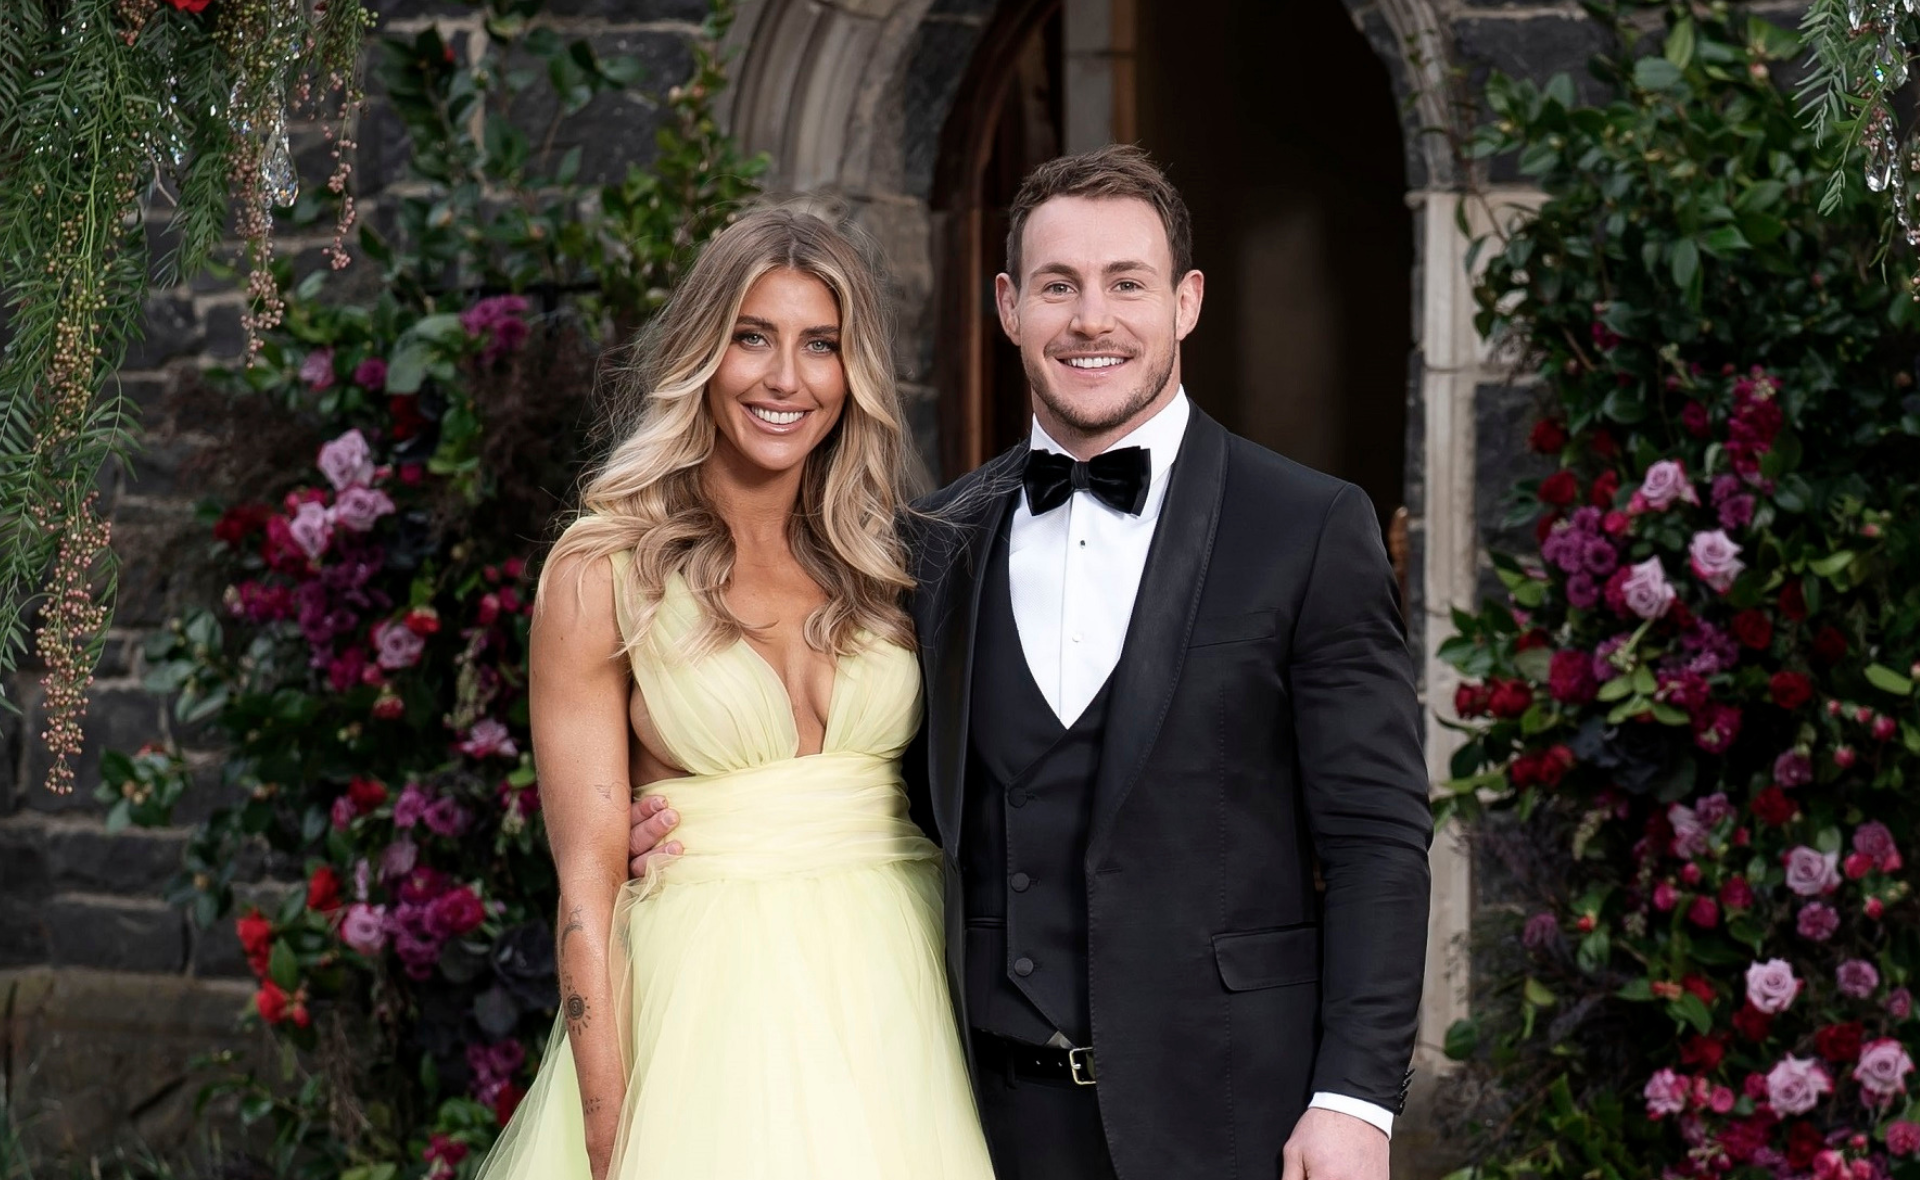 Are The Bachelors Luke Bateman and Ellie Rolfe still together after the touching final rose ceremony?